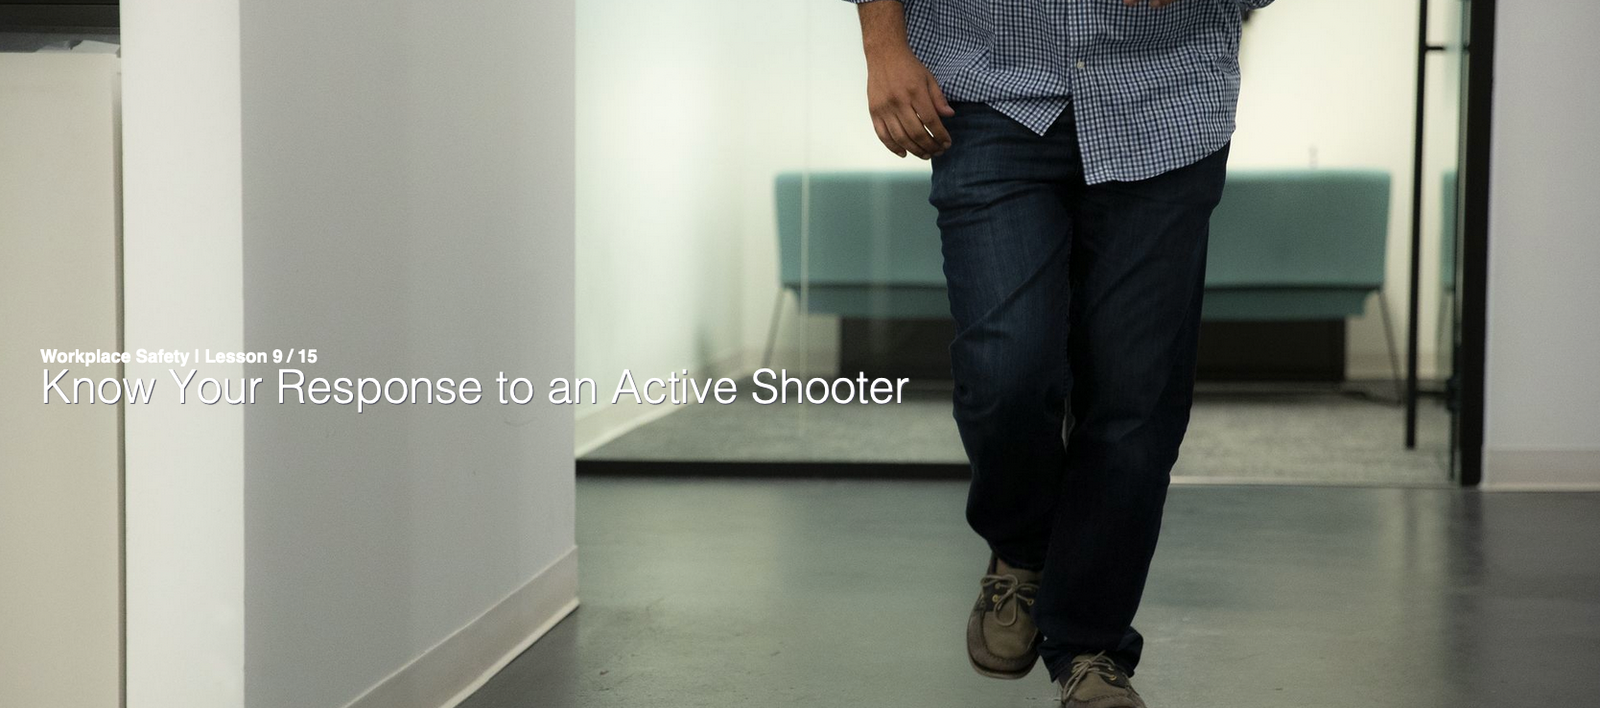 Know Your Response to an Active Shooter